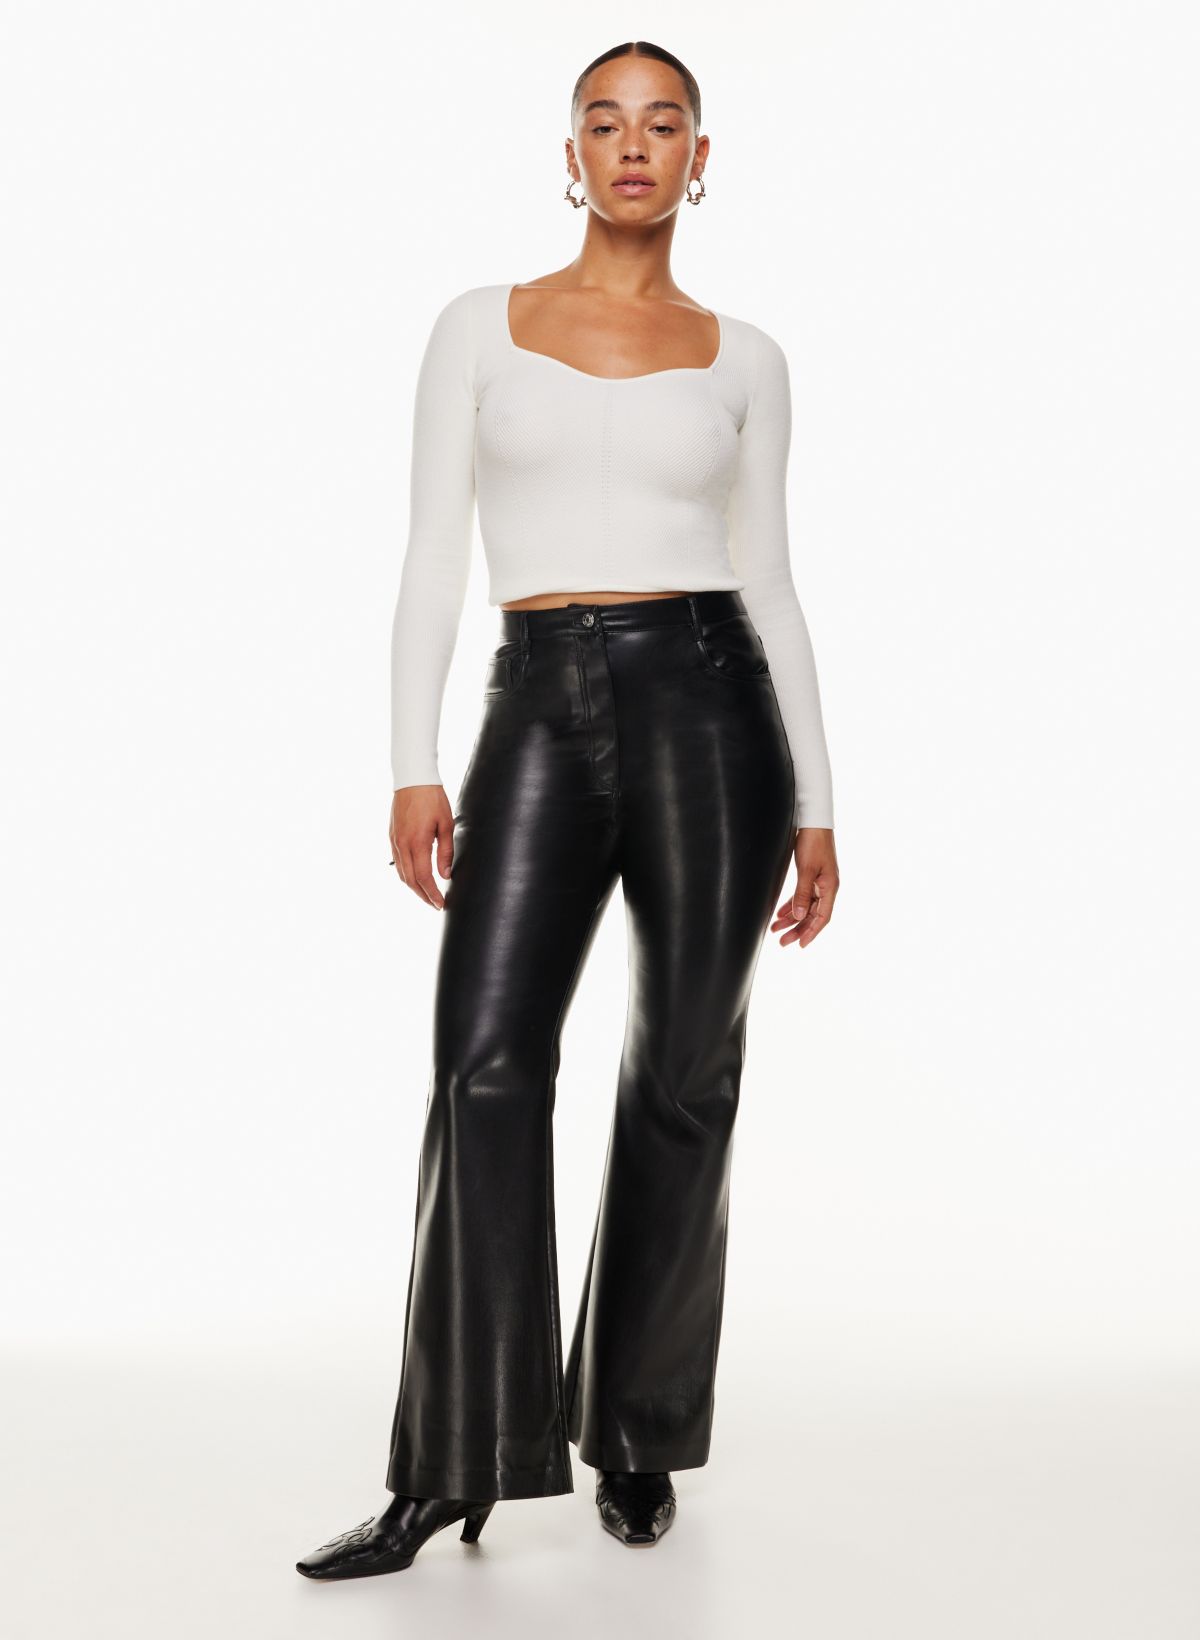 ARITZIA MELINA PANT TRY ON & REVIEW